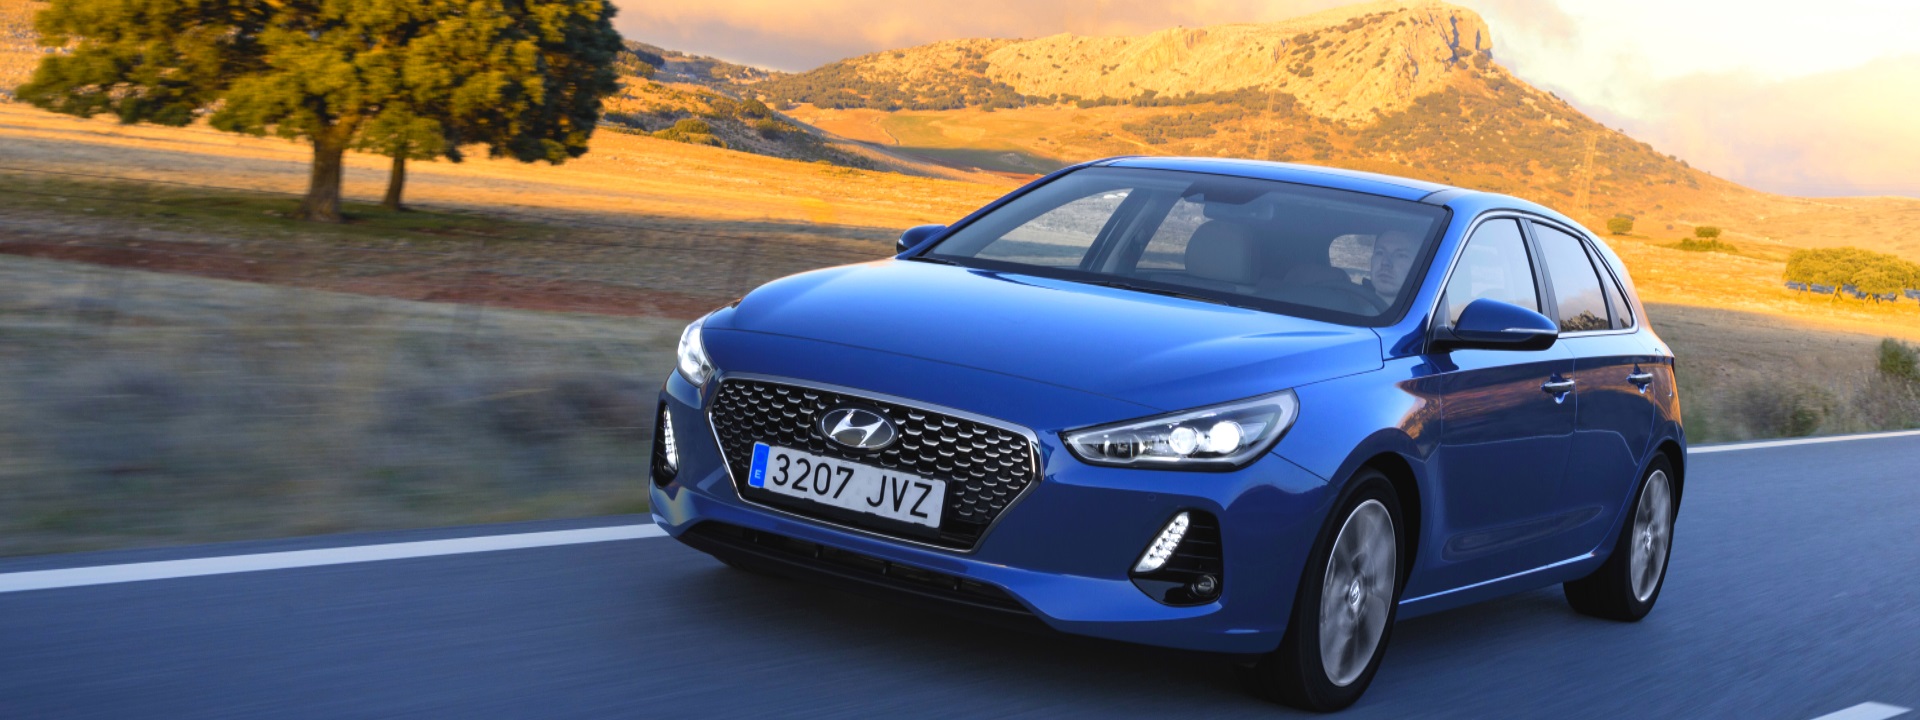 The New Generation i30: class-leading road safety